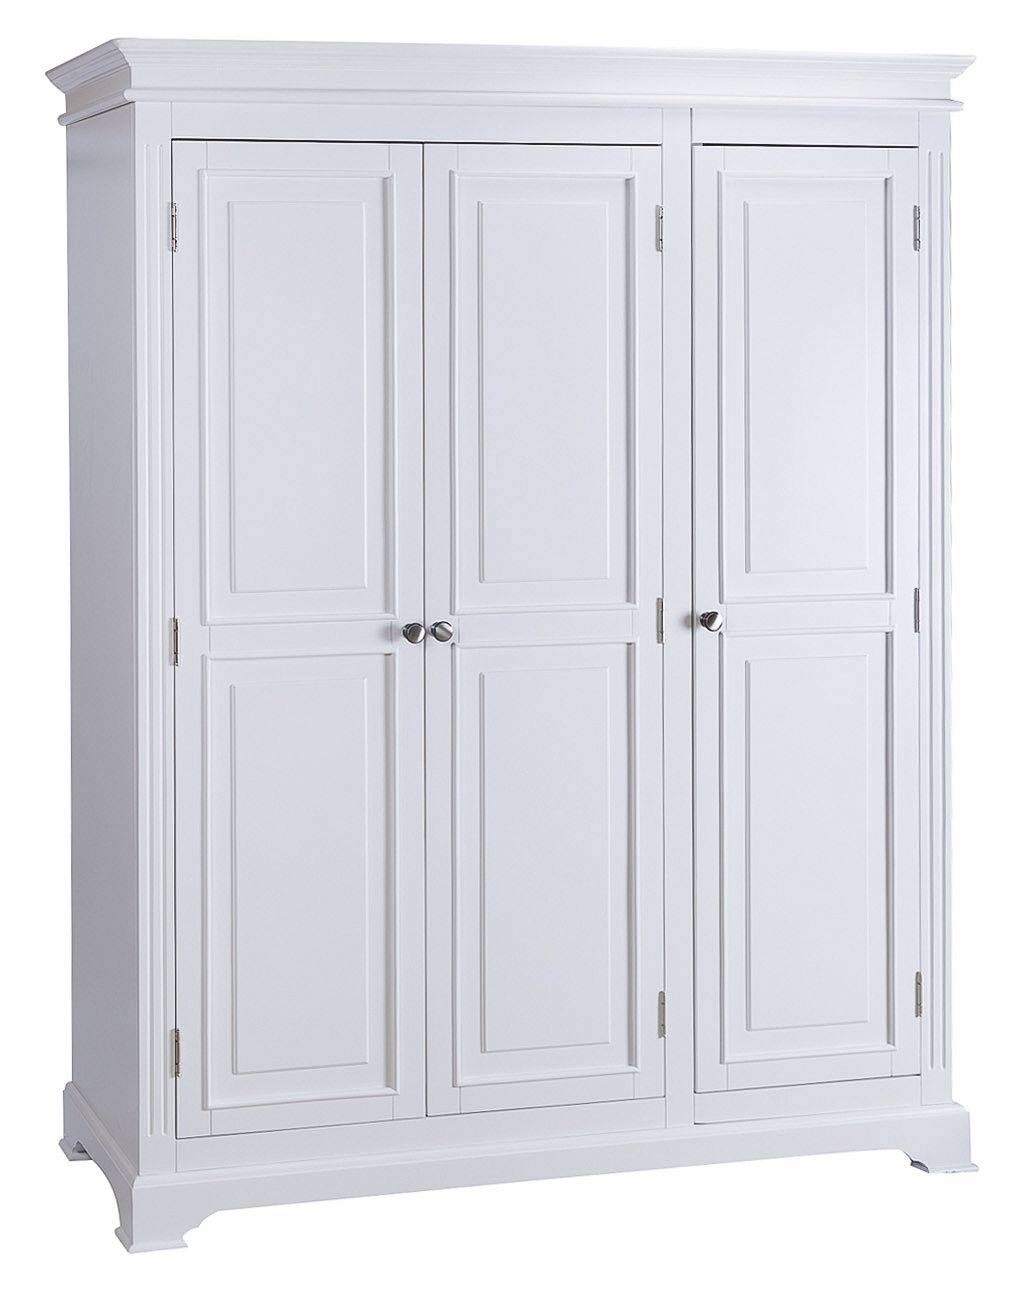 Burford White Painted Triple Three Door Large Wardrobe Intended For Large White Wardrobes With Drawers (View 13 of 15)